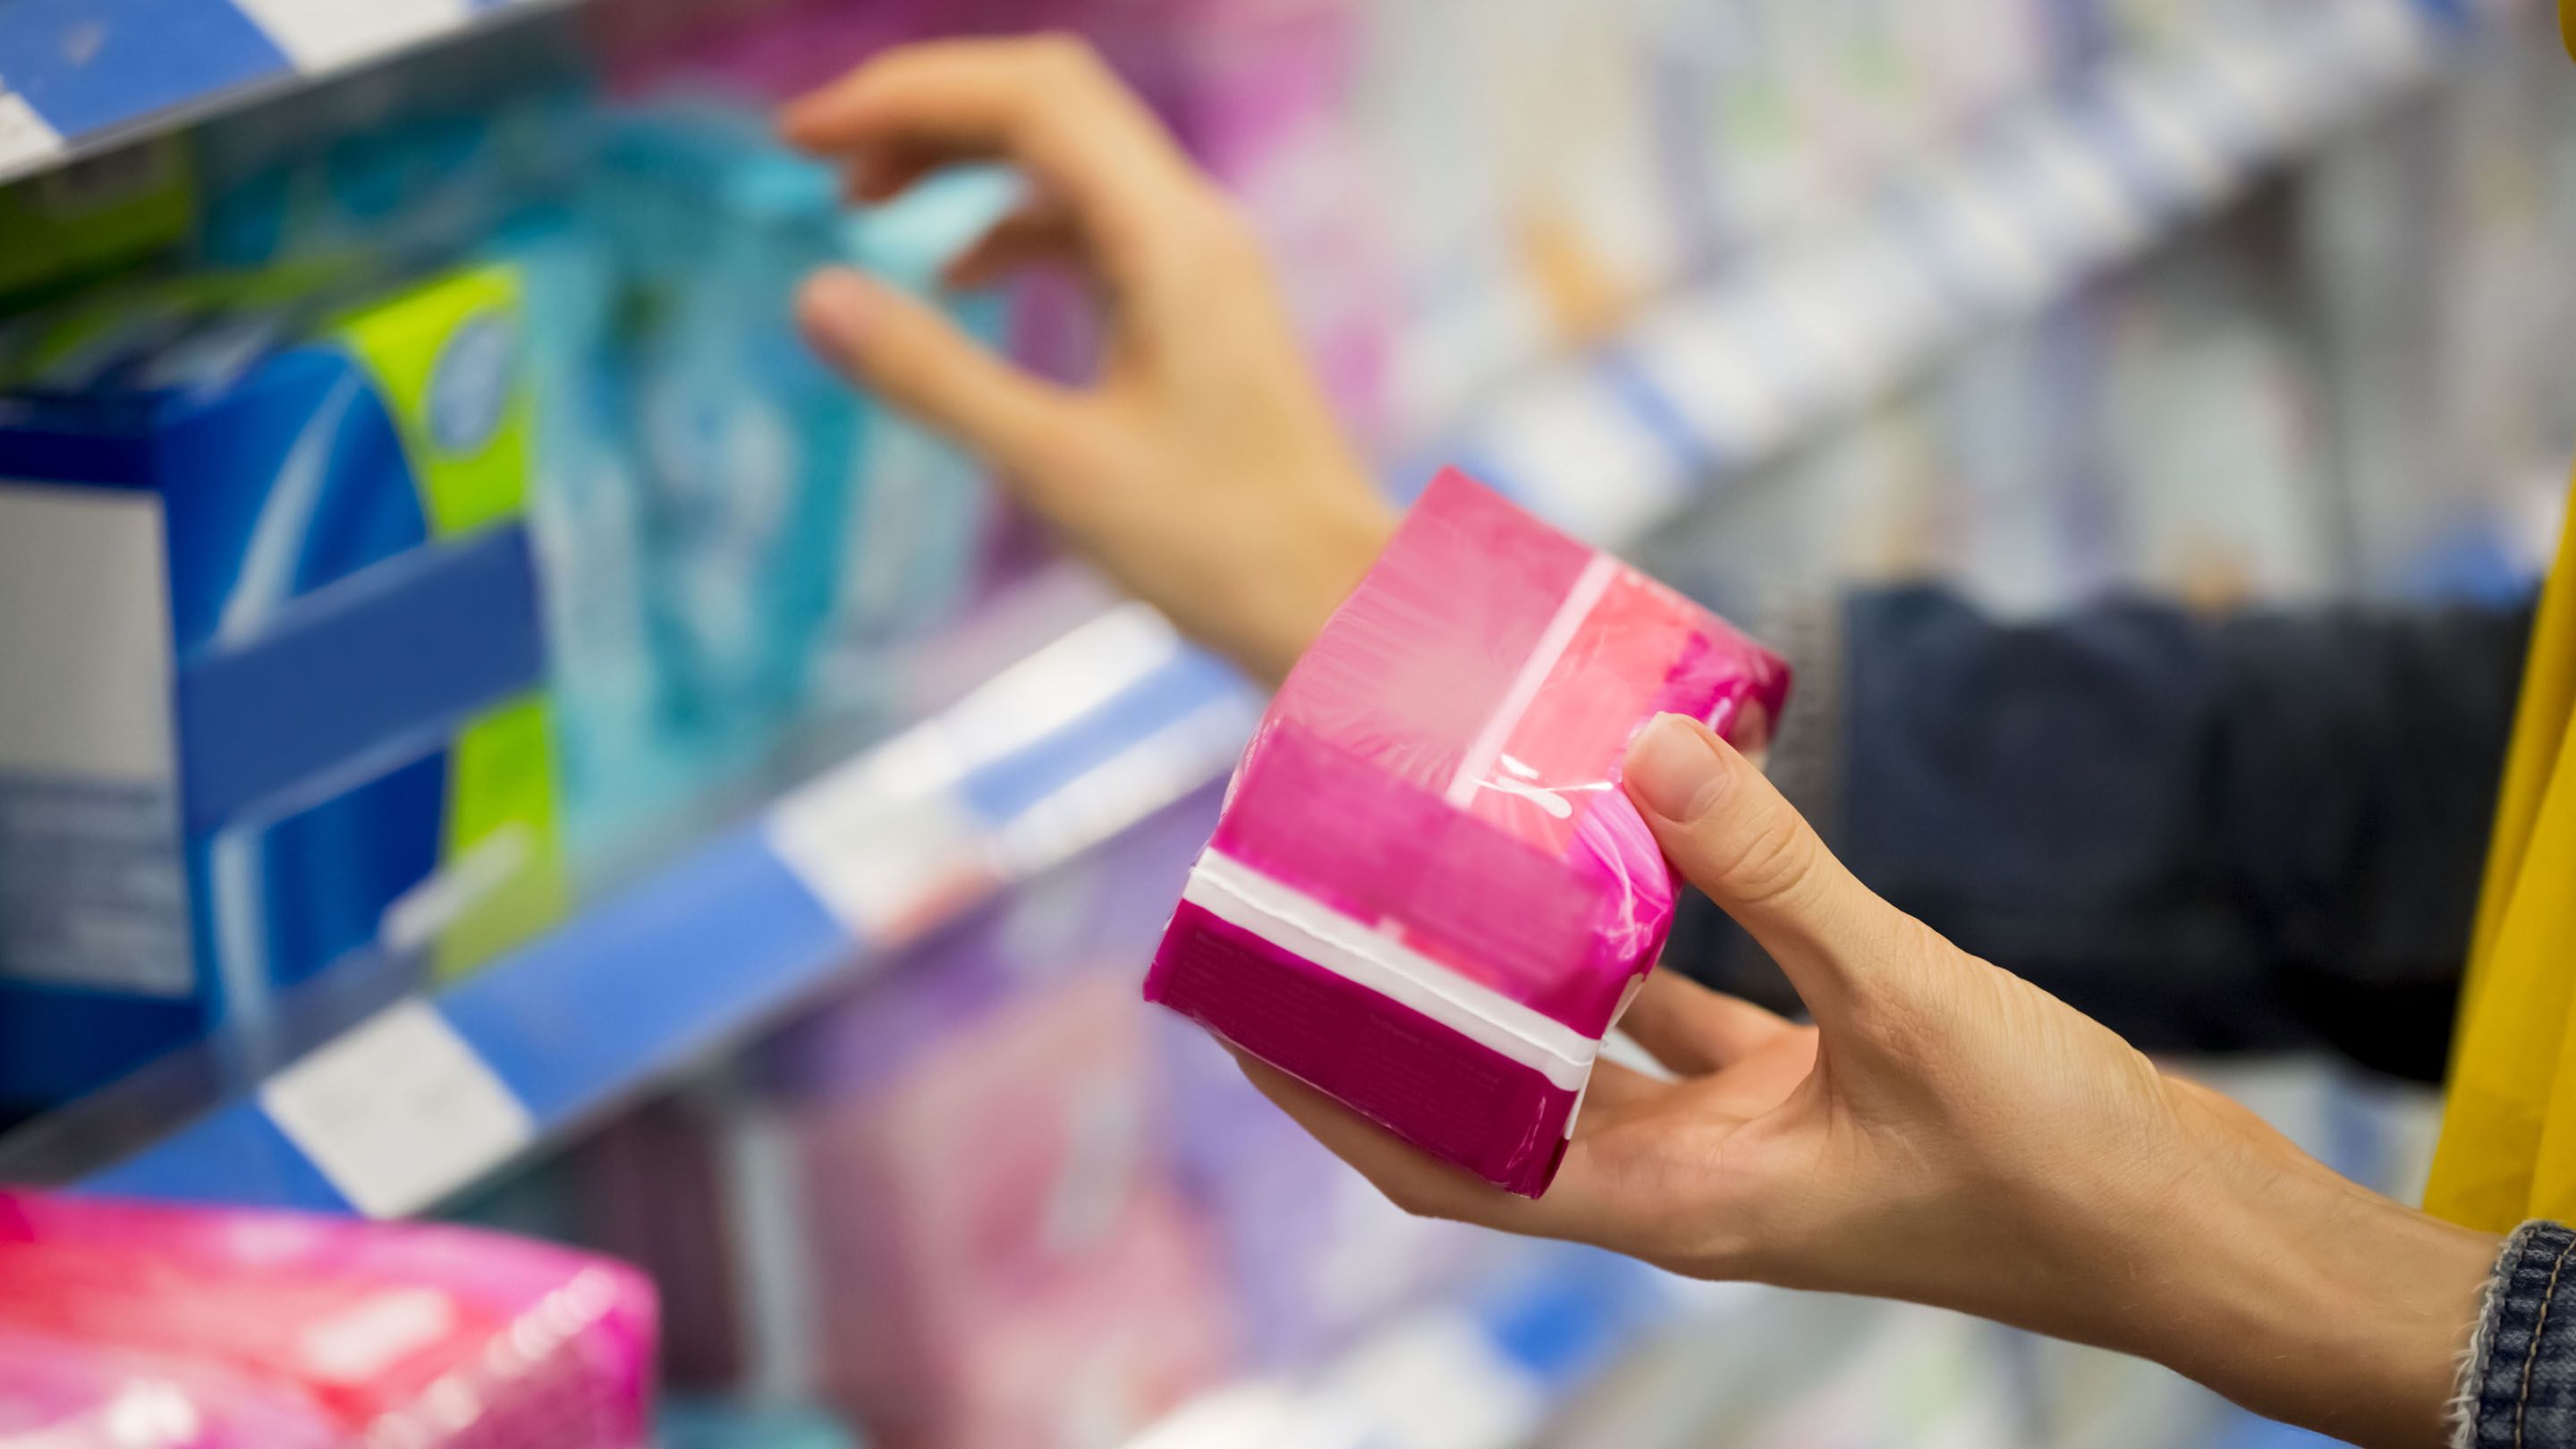 Are tampons and feminine products HSA/FSA eligible? – LOLA